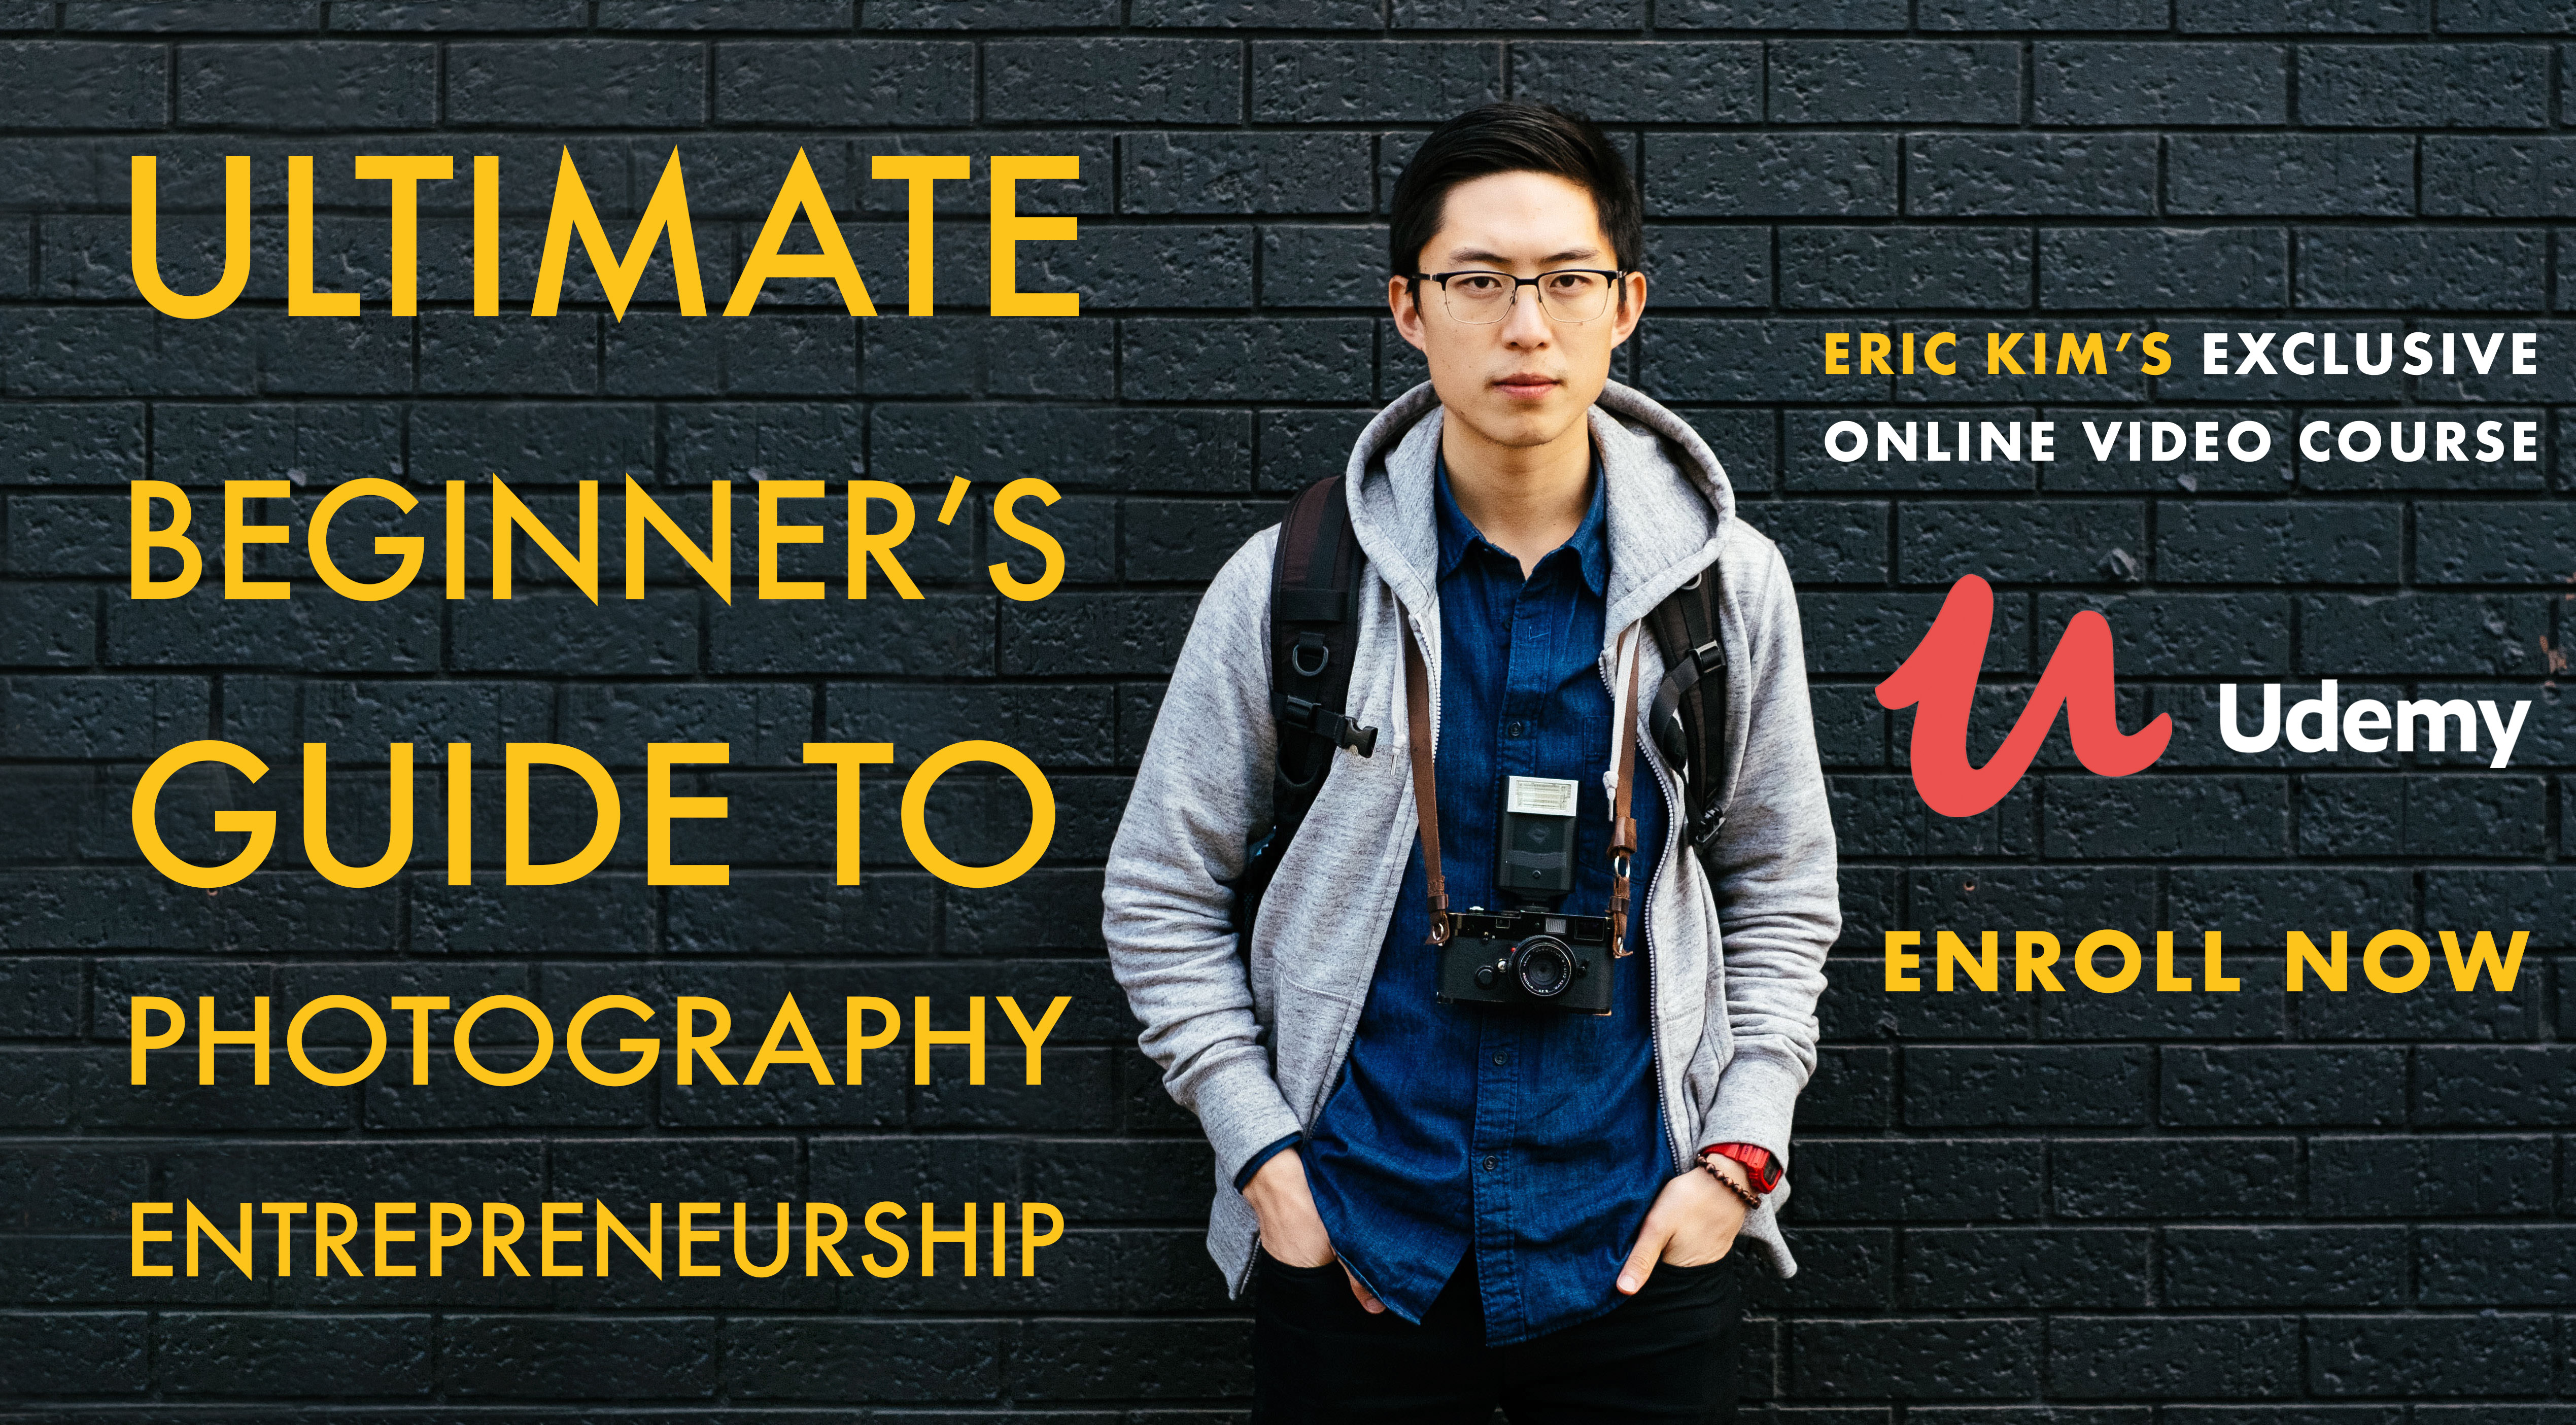 Ultimate Beginner’s Guide to Photography Entrepreneurship by Eric Eric Kim on Udemy